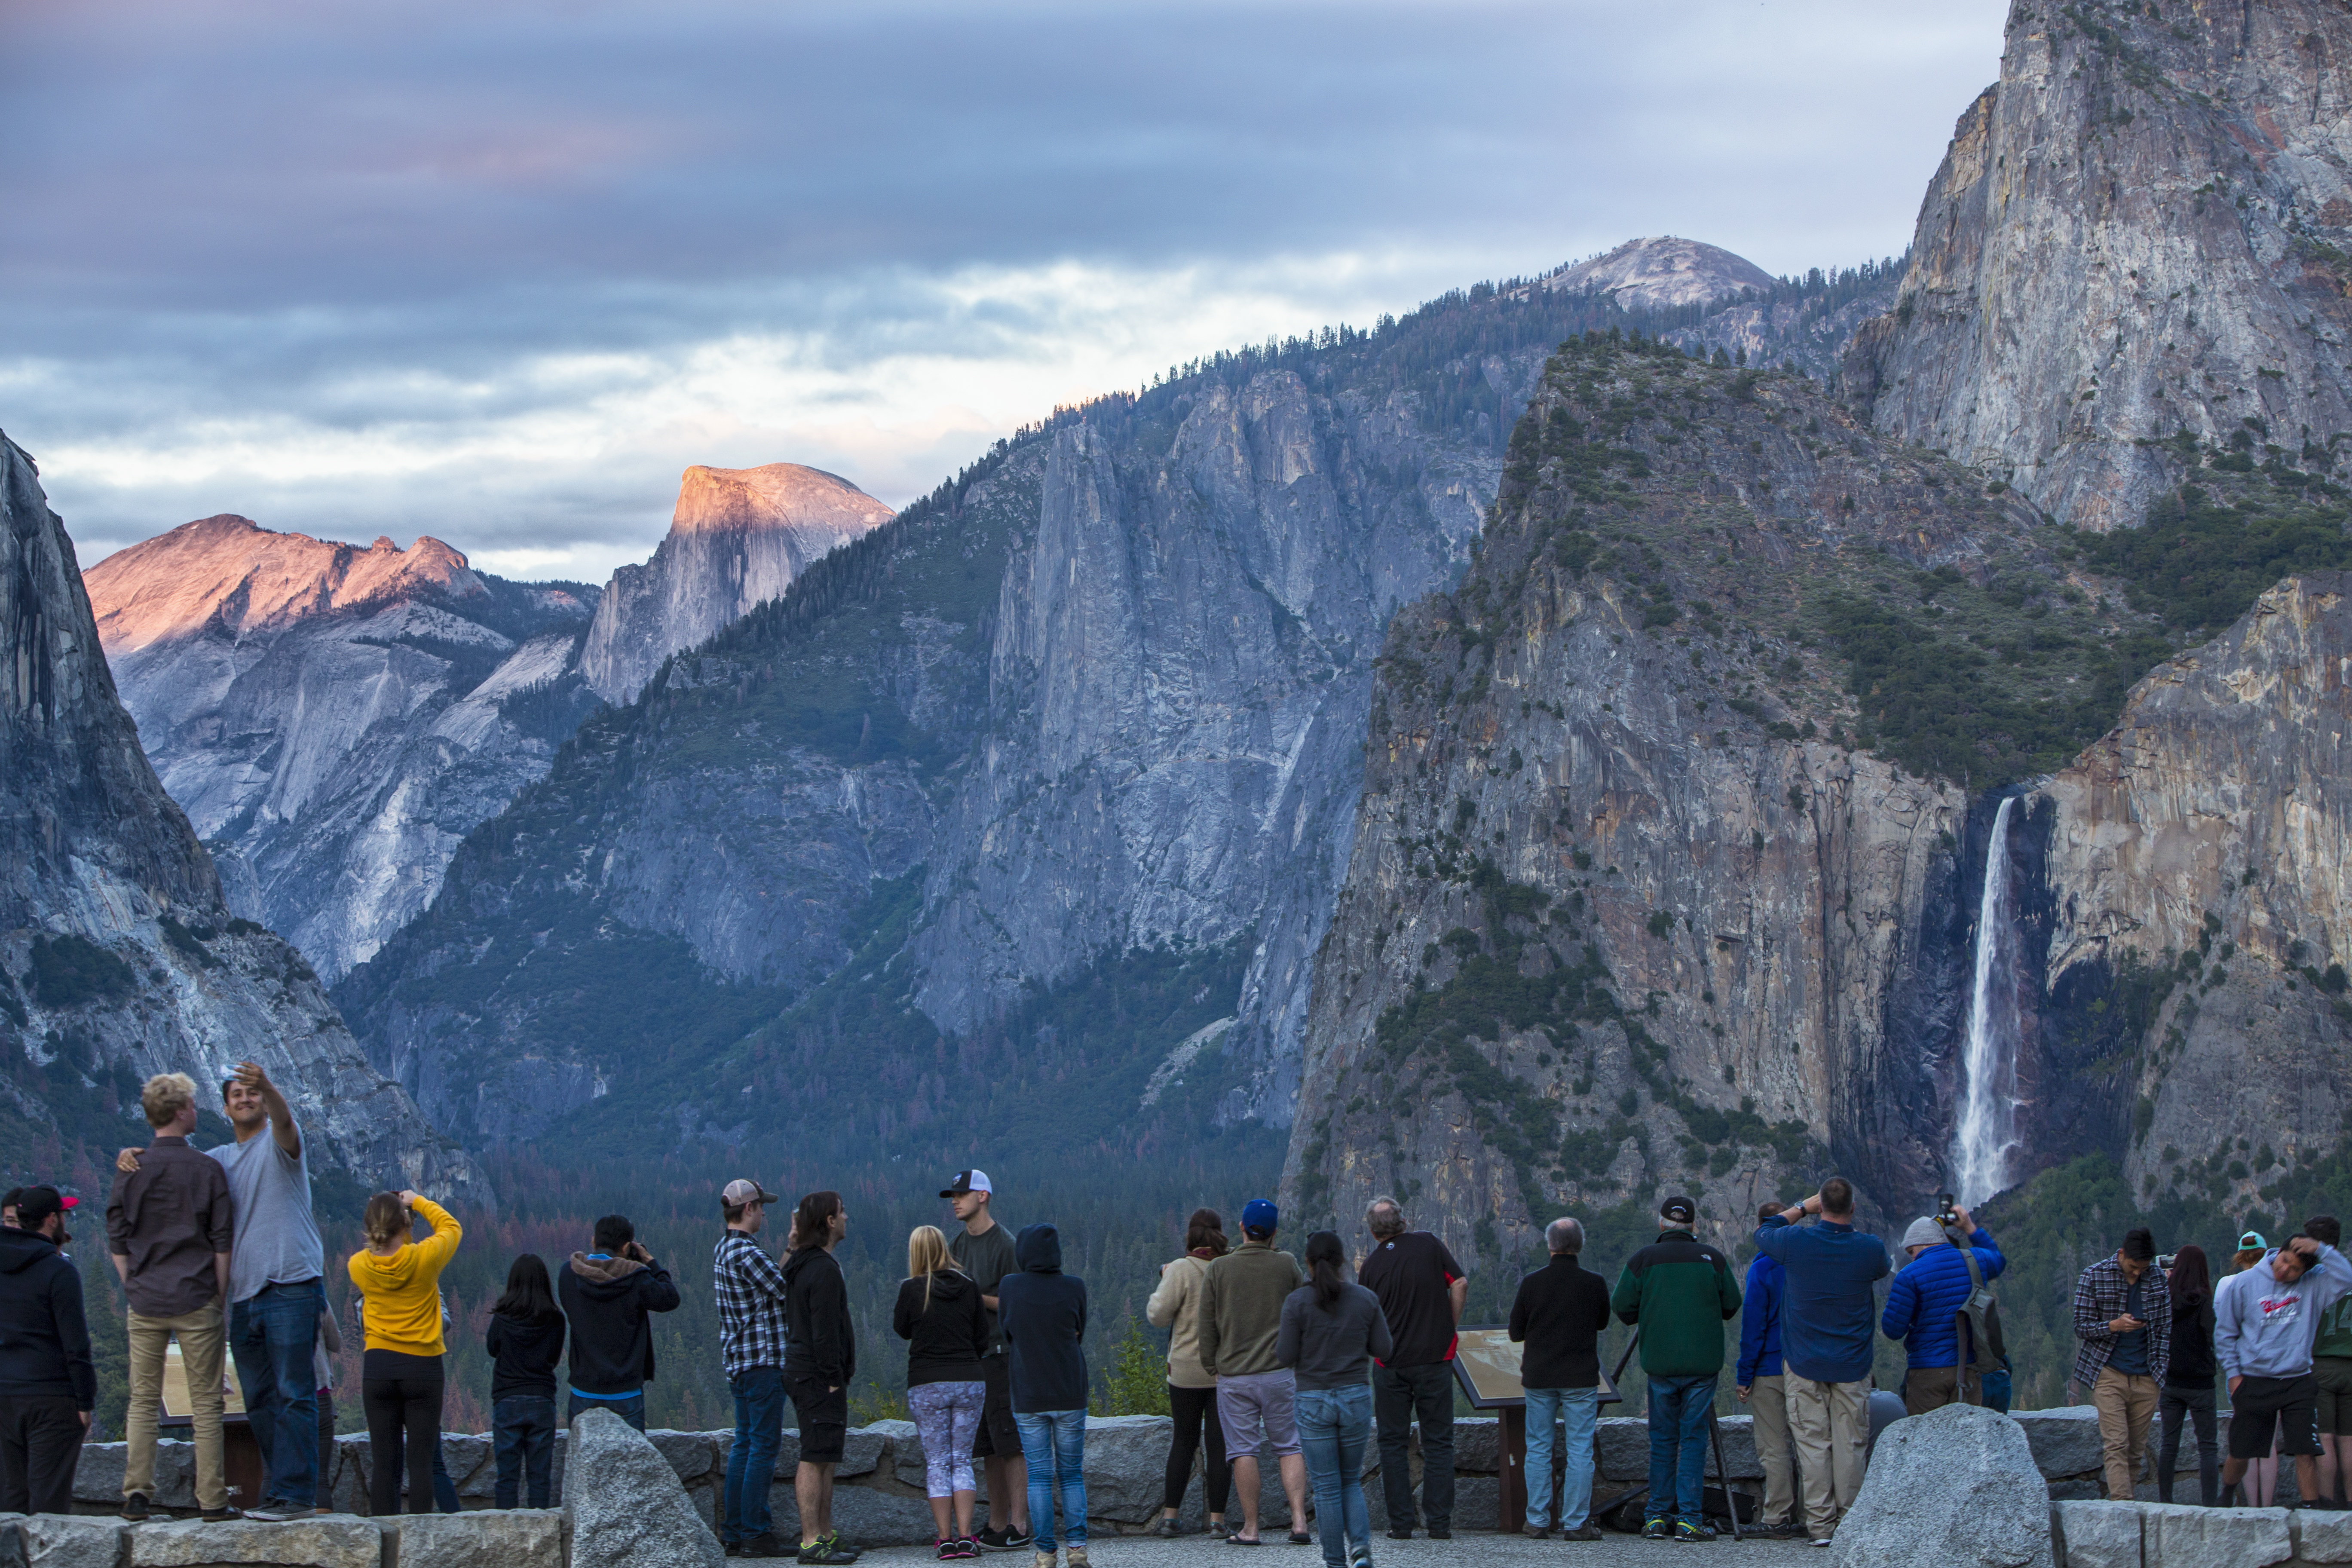 Starbucks Opened a Location in Yosemite National Park | Fortune